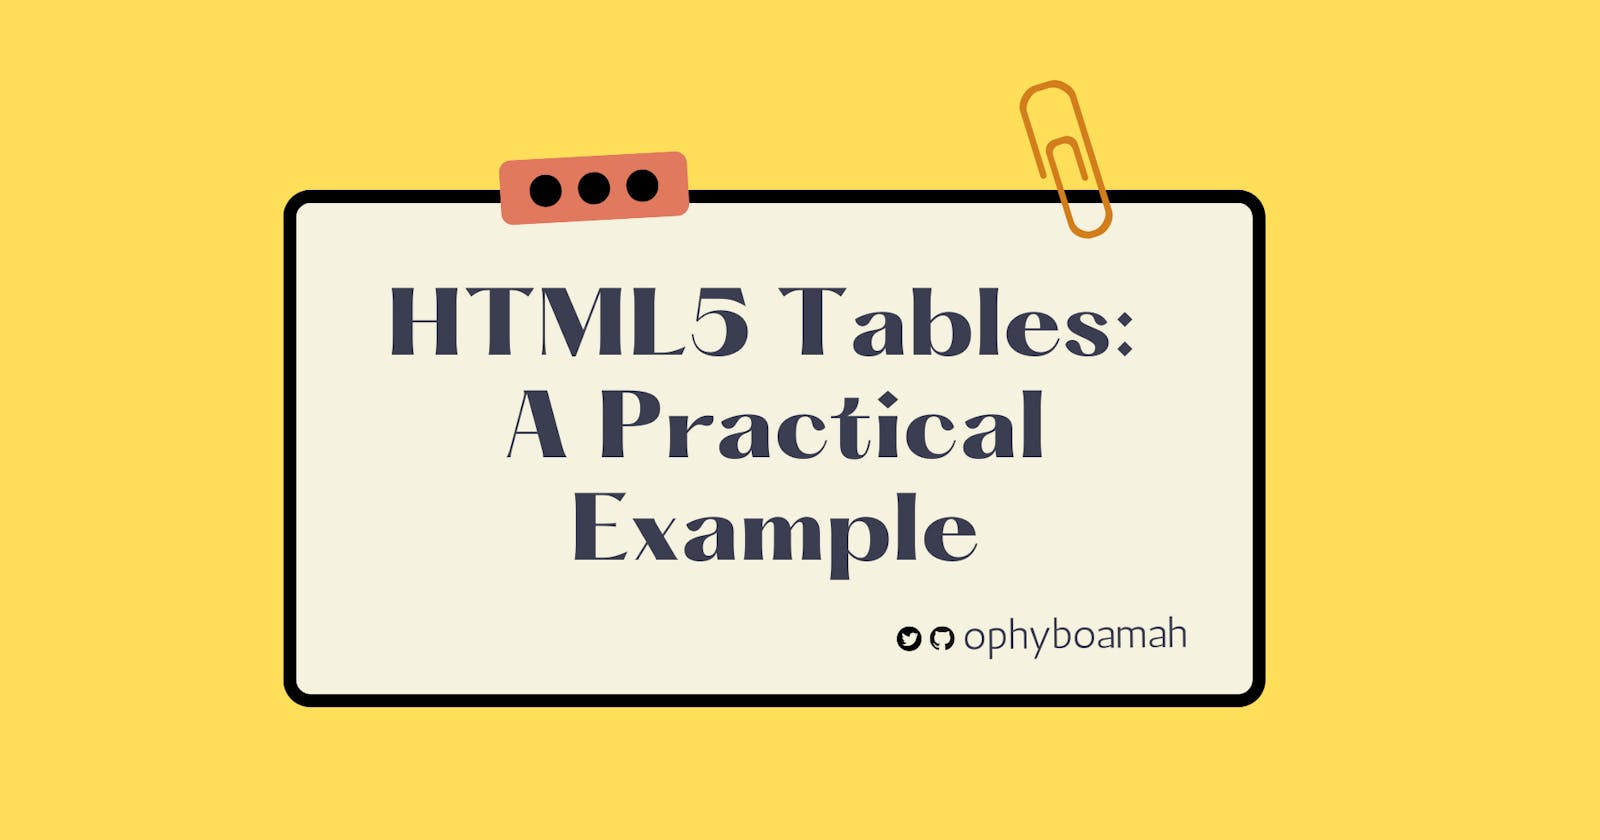 HTML5 Tables: A Practical Example